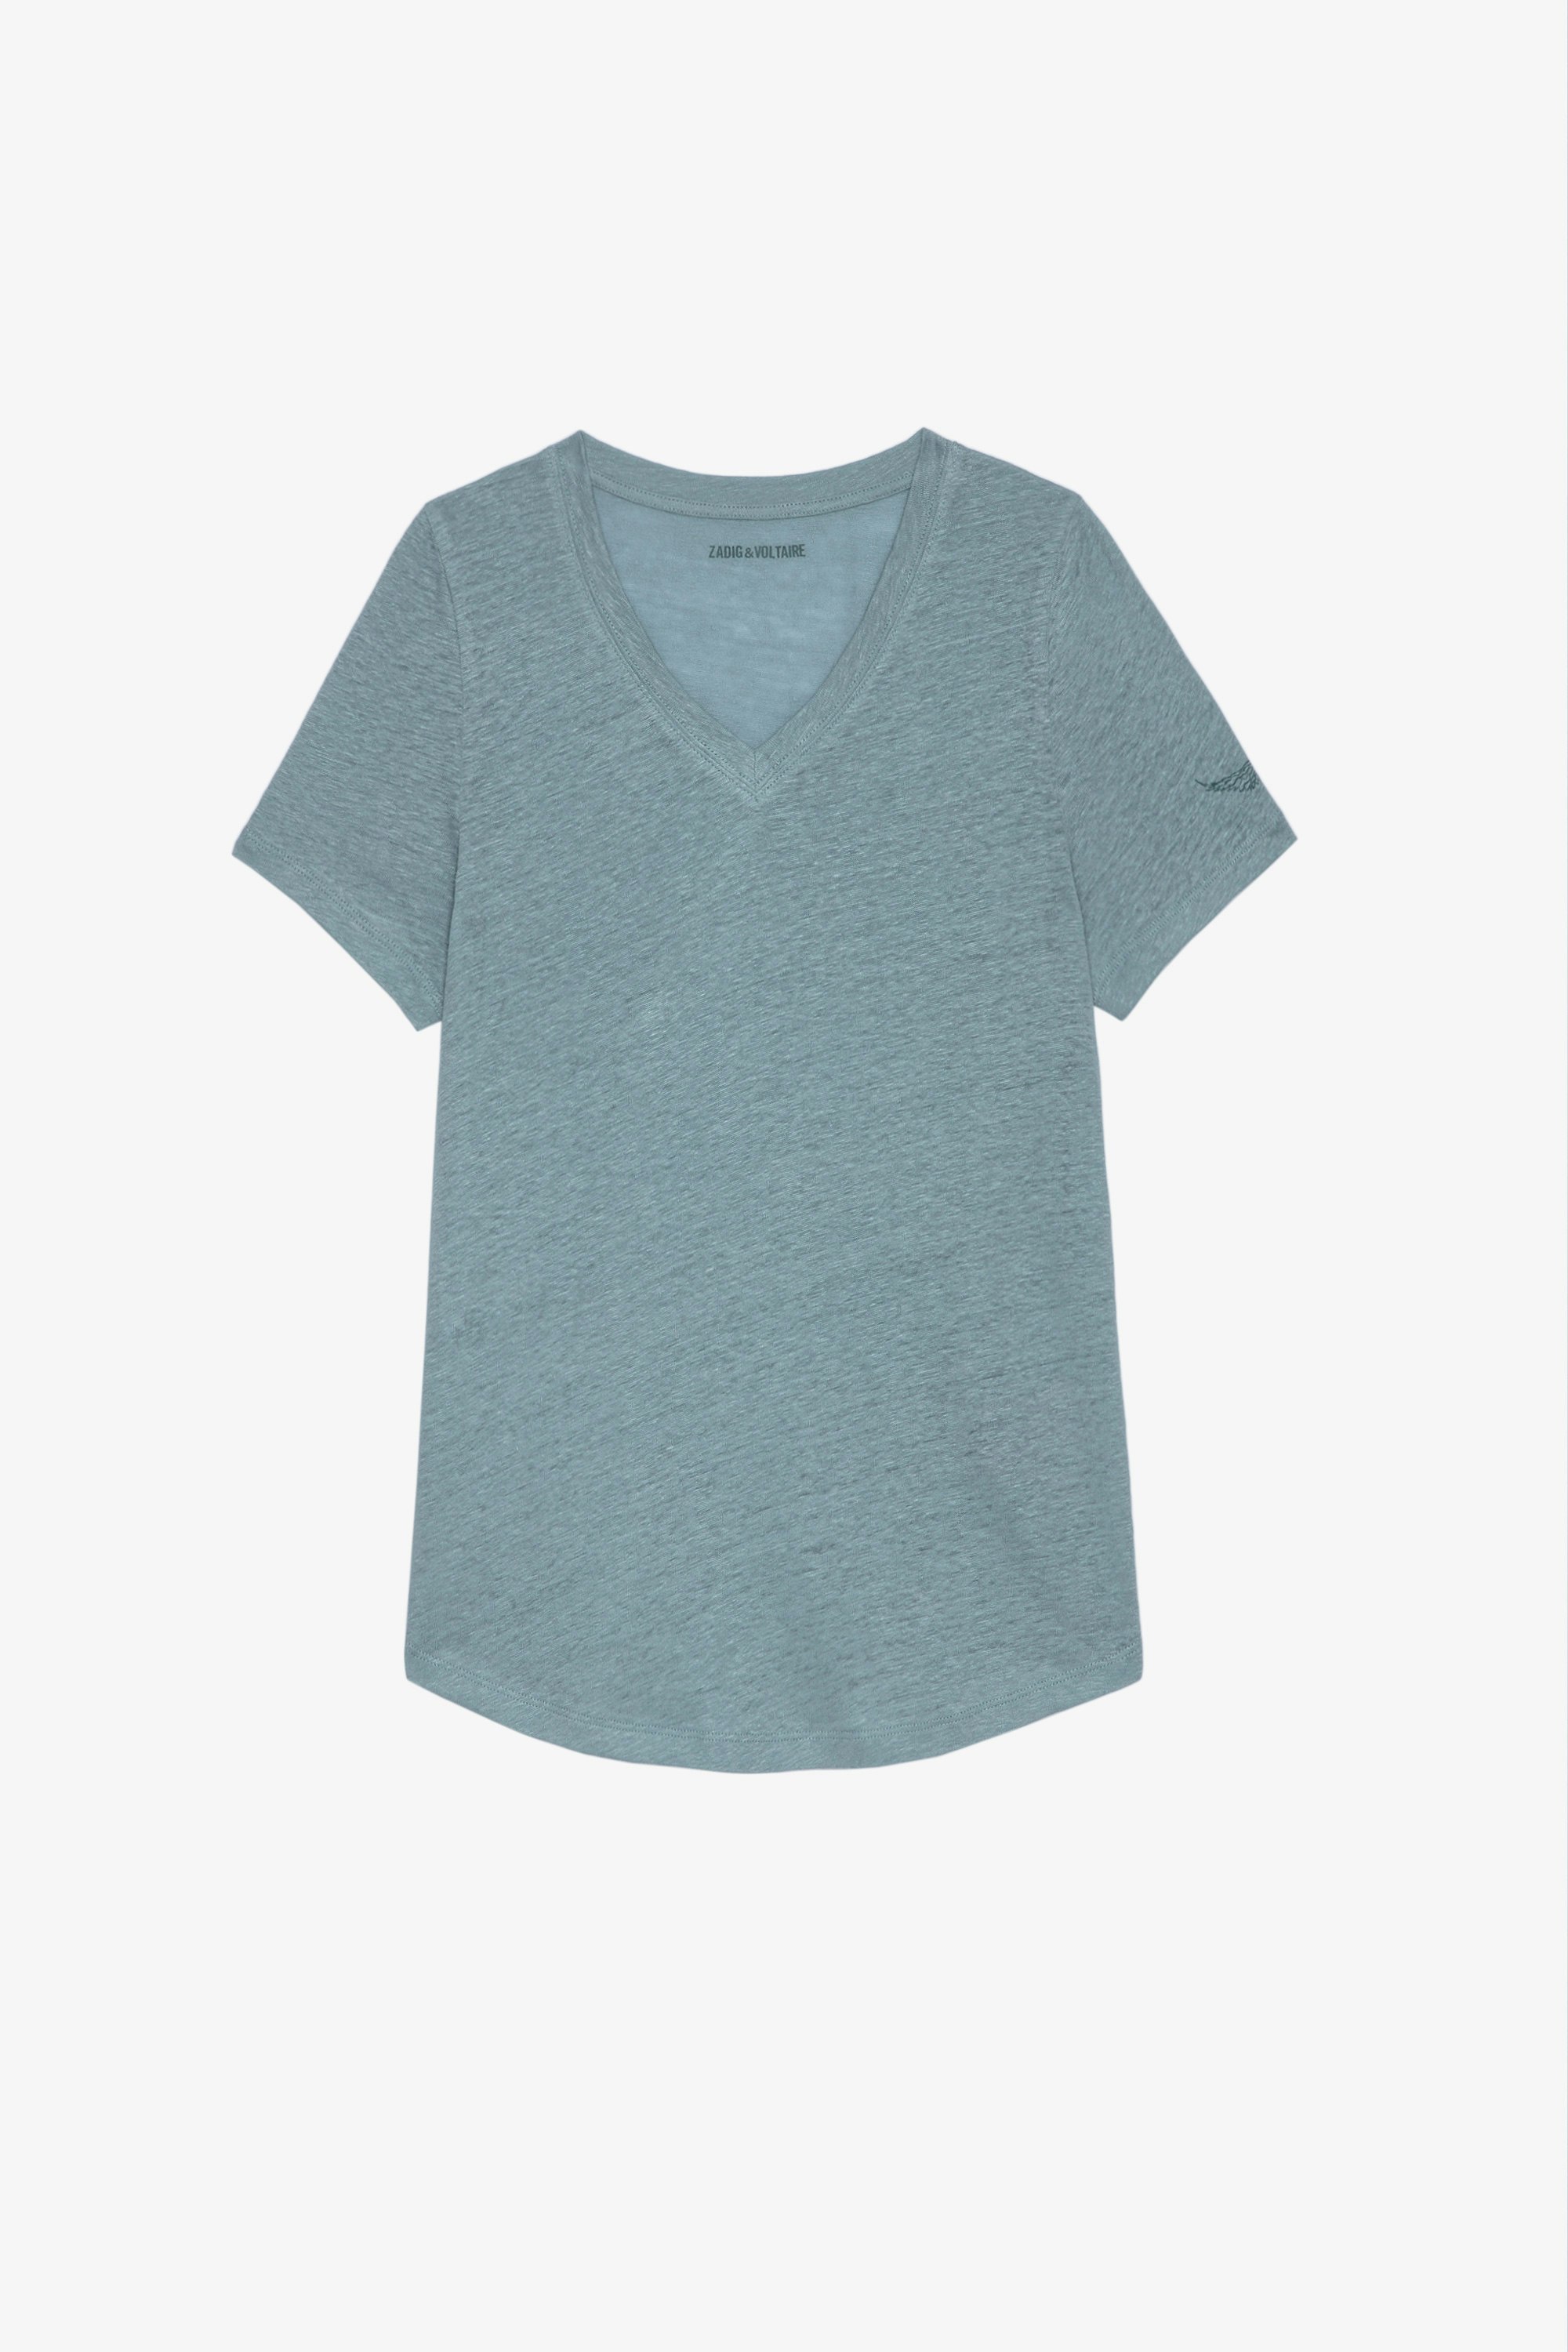 Atia Wings リネンＴシャツ Women’s light blue cotton T-shirt with V neckline and long sleeves